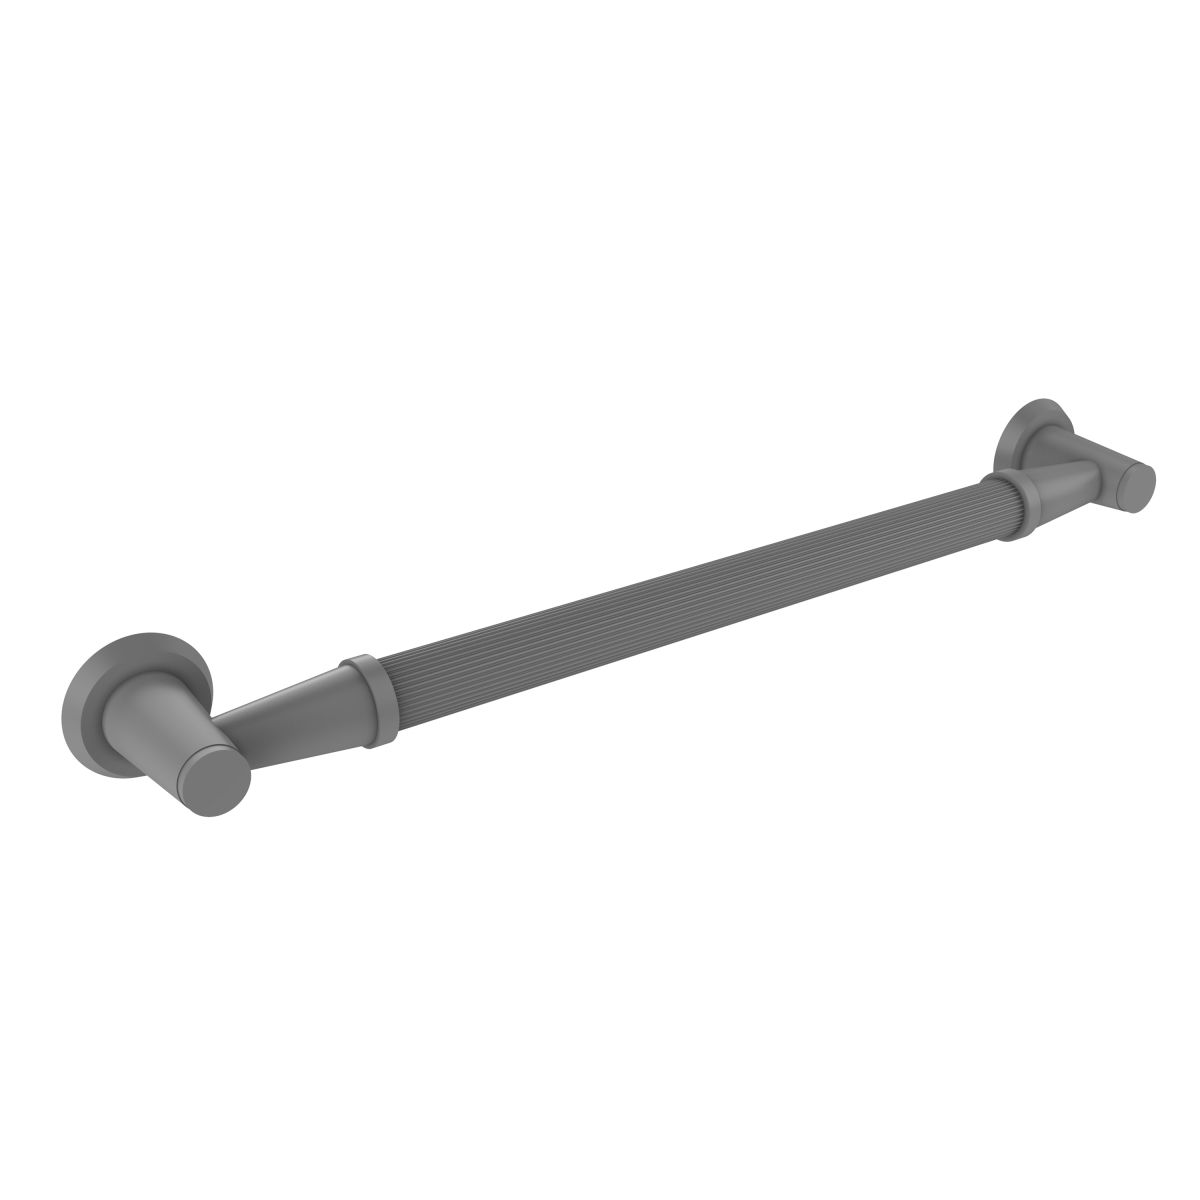 Picture of Allied Brass MD-GRR-36-GYM 36 in. Reeded Grab Bar, Matte Gray - 3.5 x 38 x 36 in.